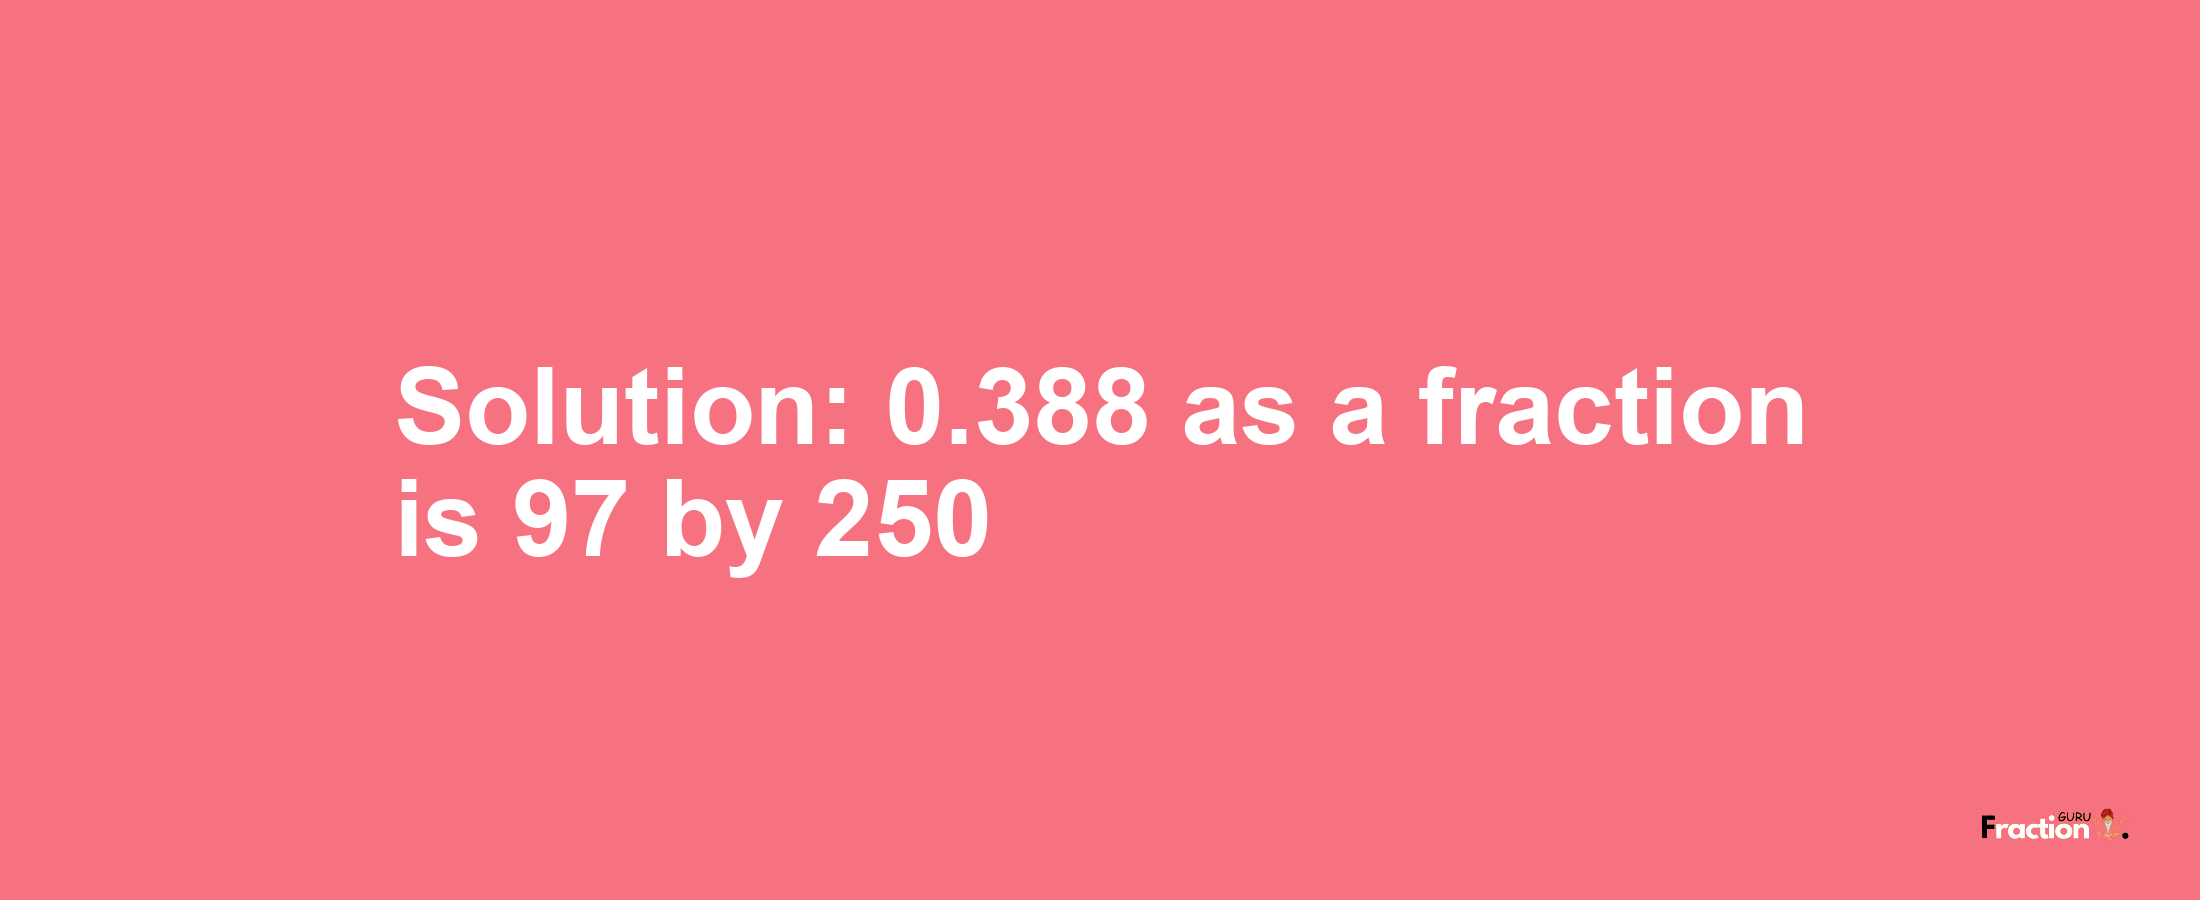 Solution:0.388 as a fraction is 97/250